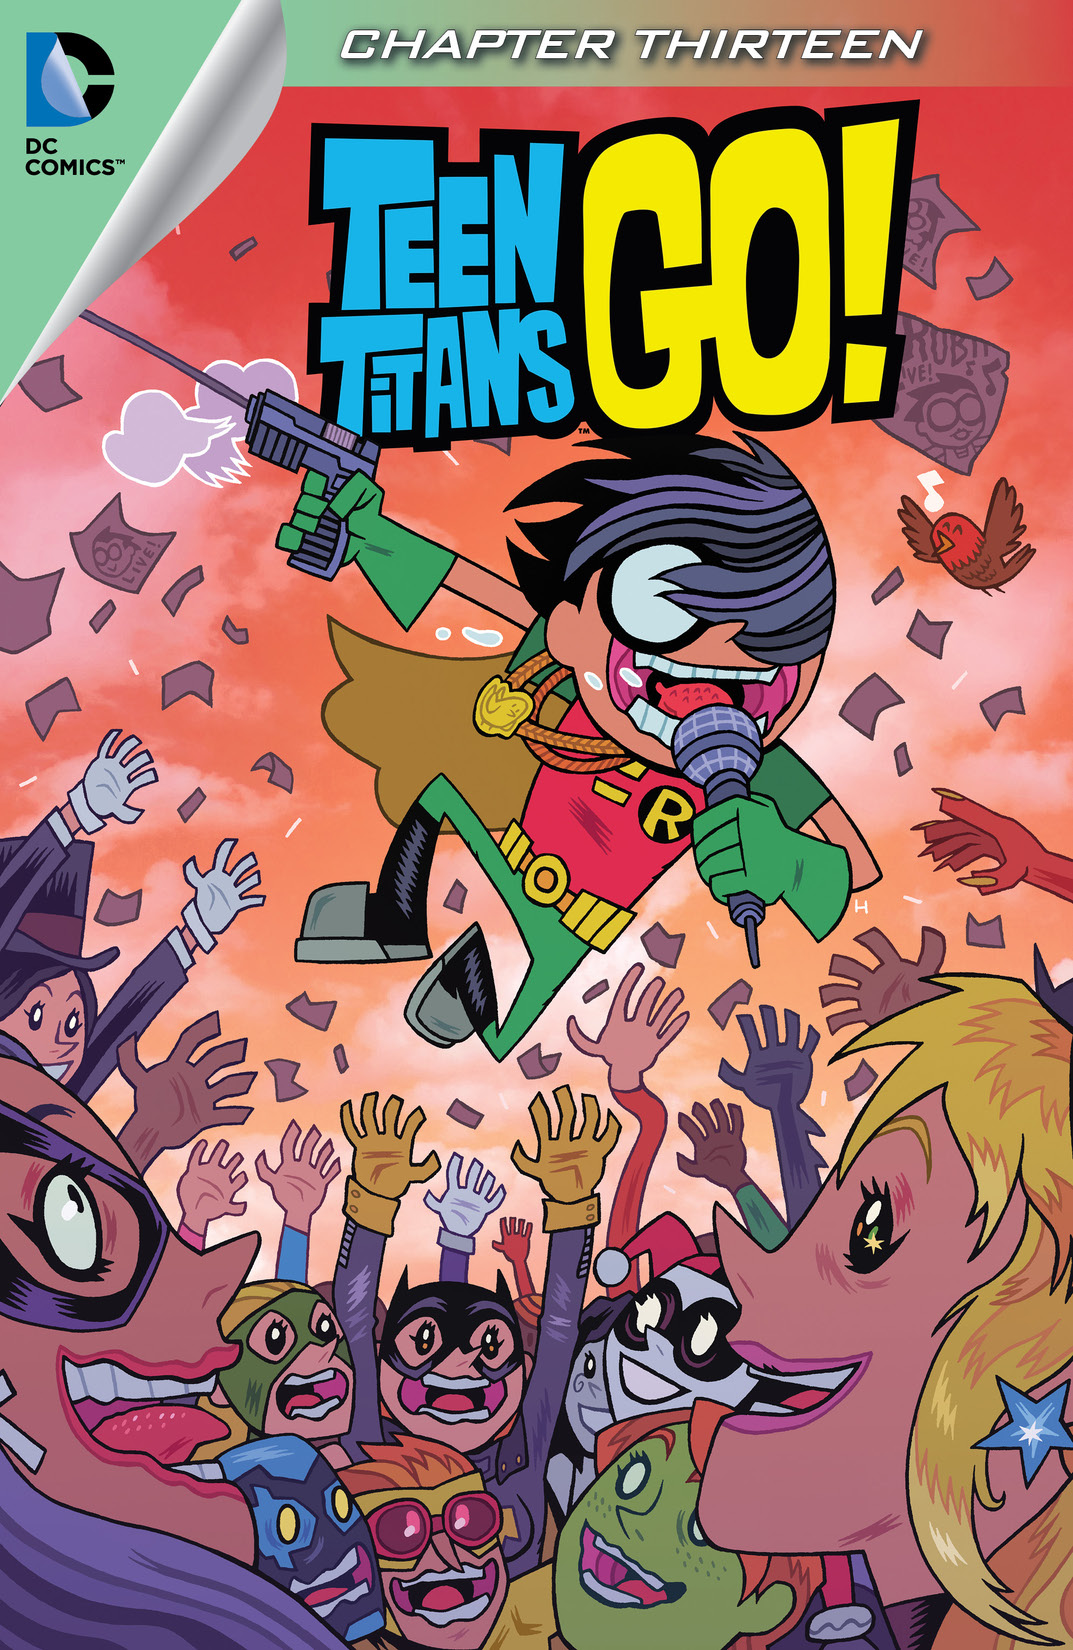 Teen Titans Go! (2013-) #13 preview images